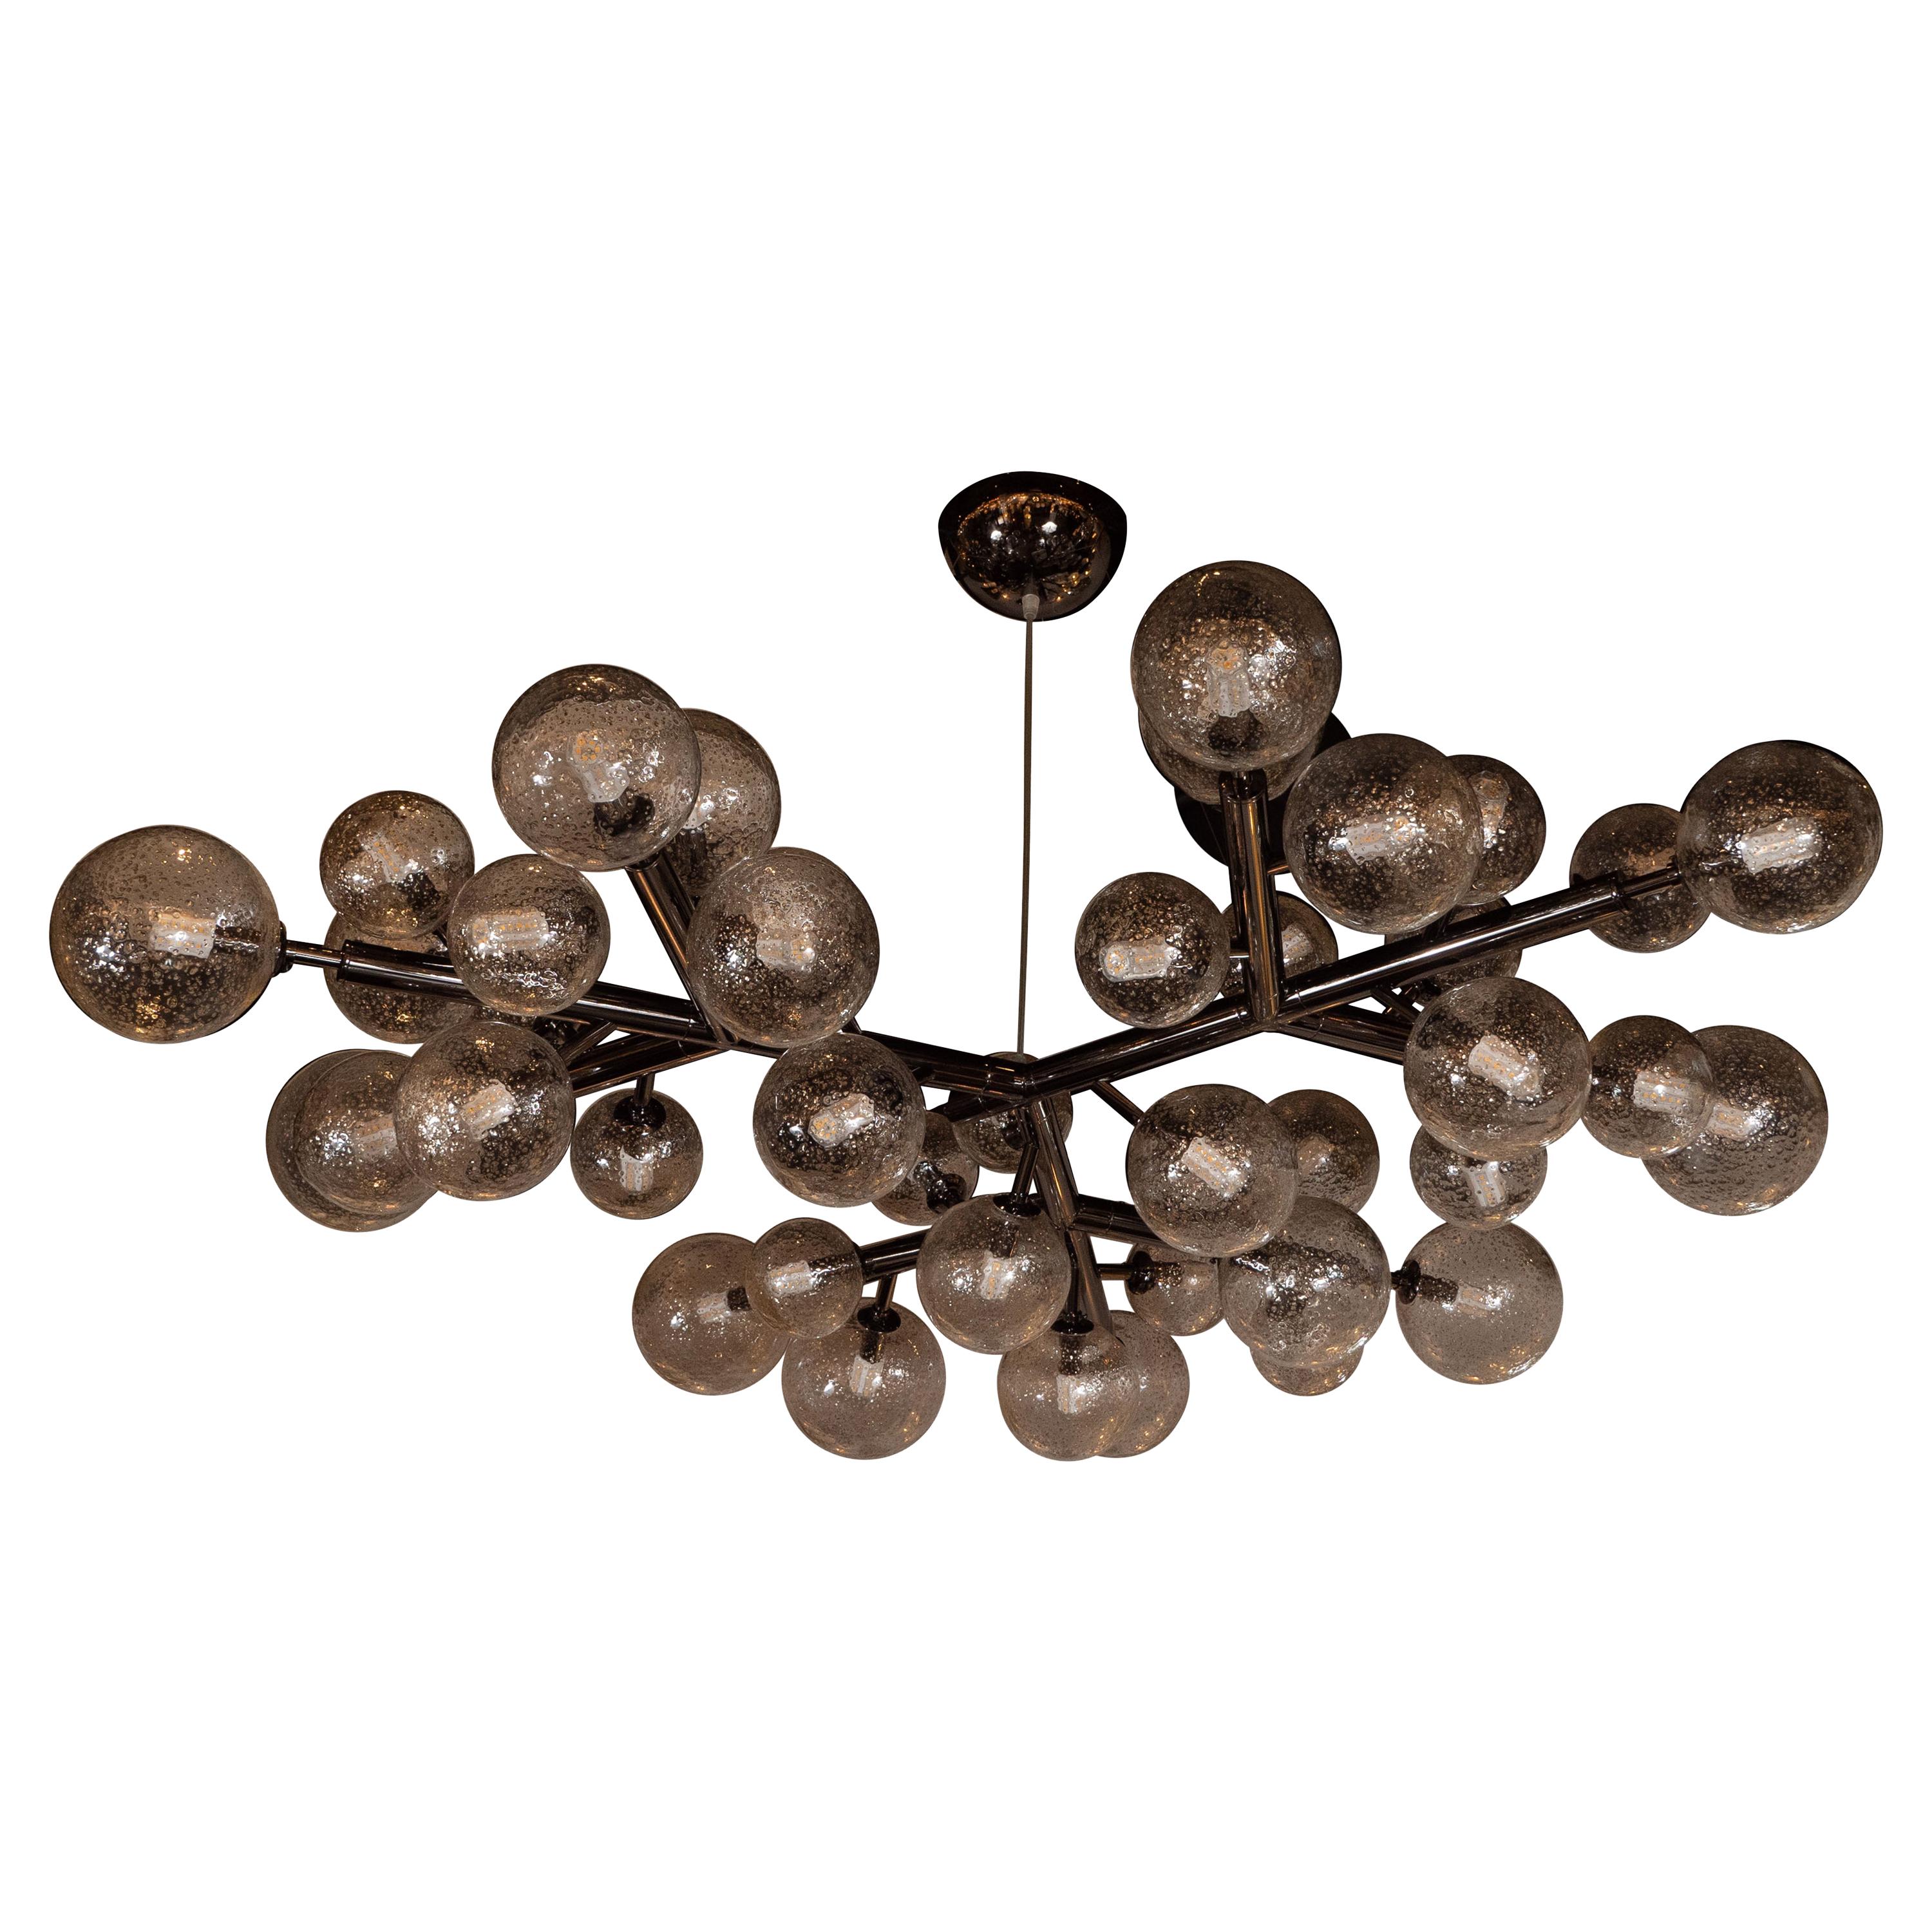 This stunning and dramatic polished gunmetal and hand blown Murano glass molecular 